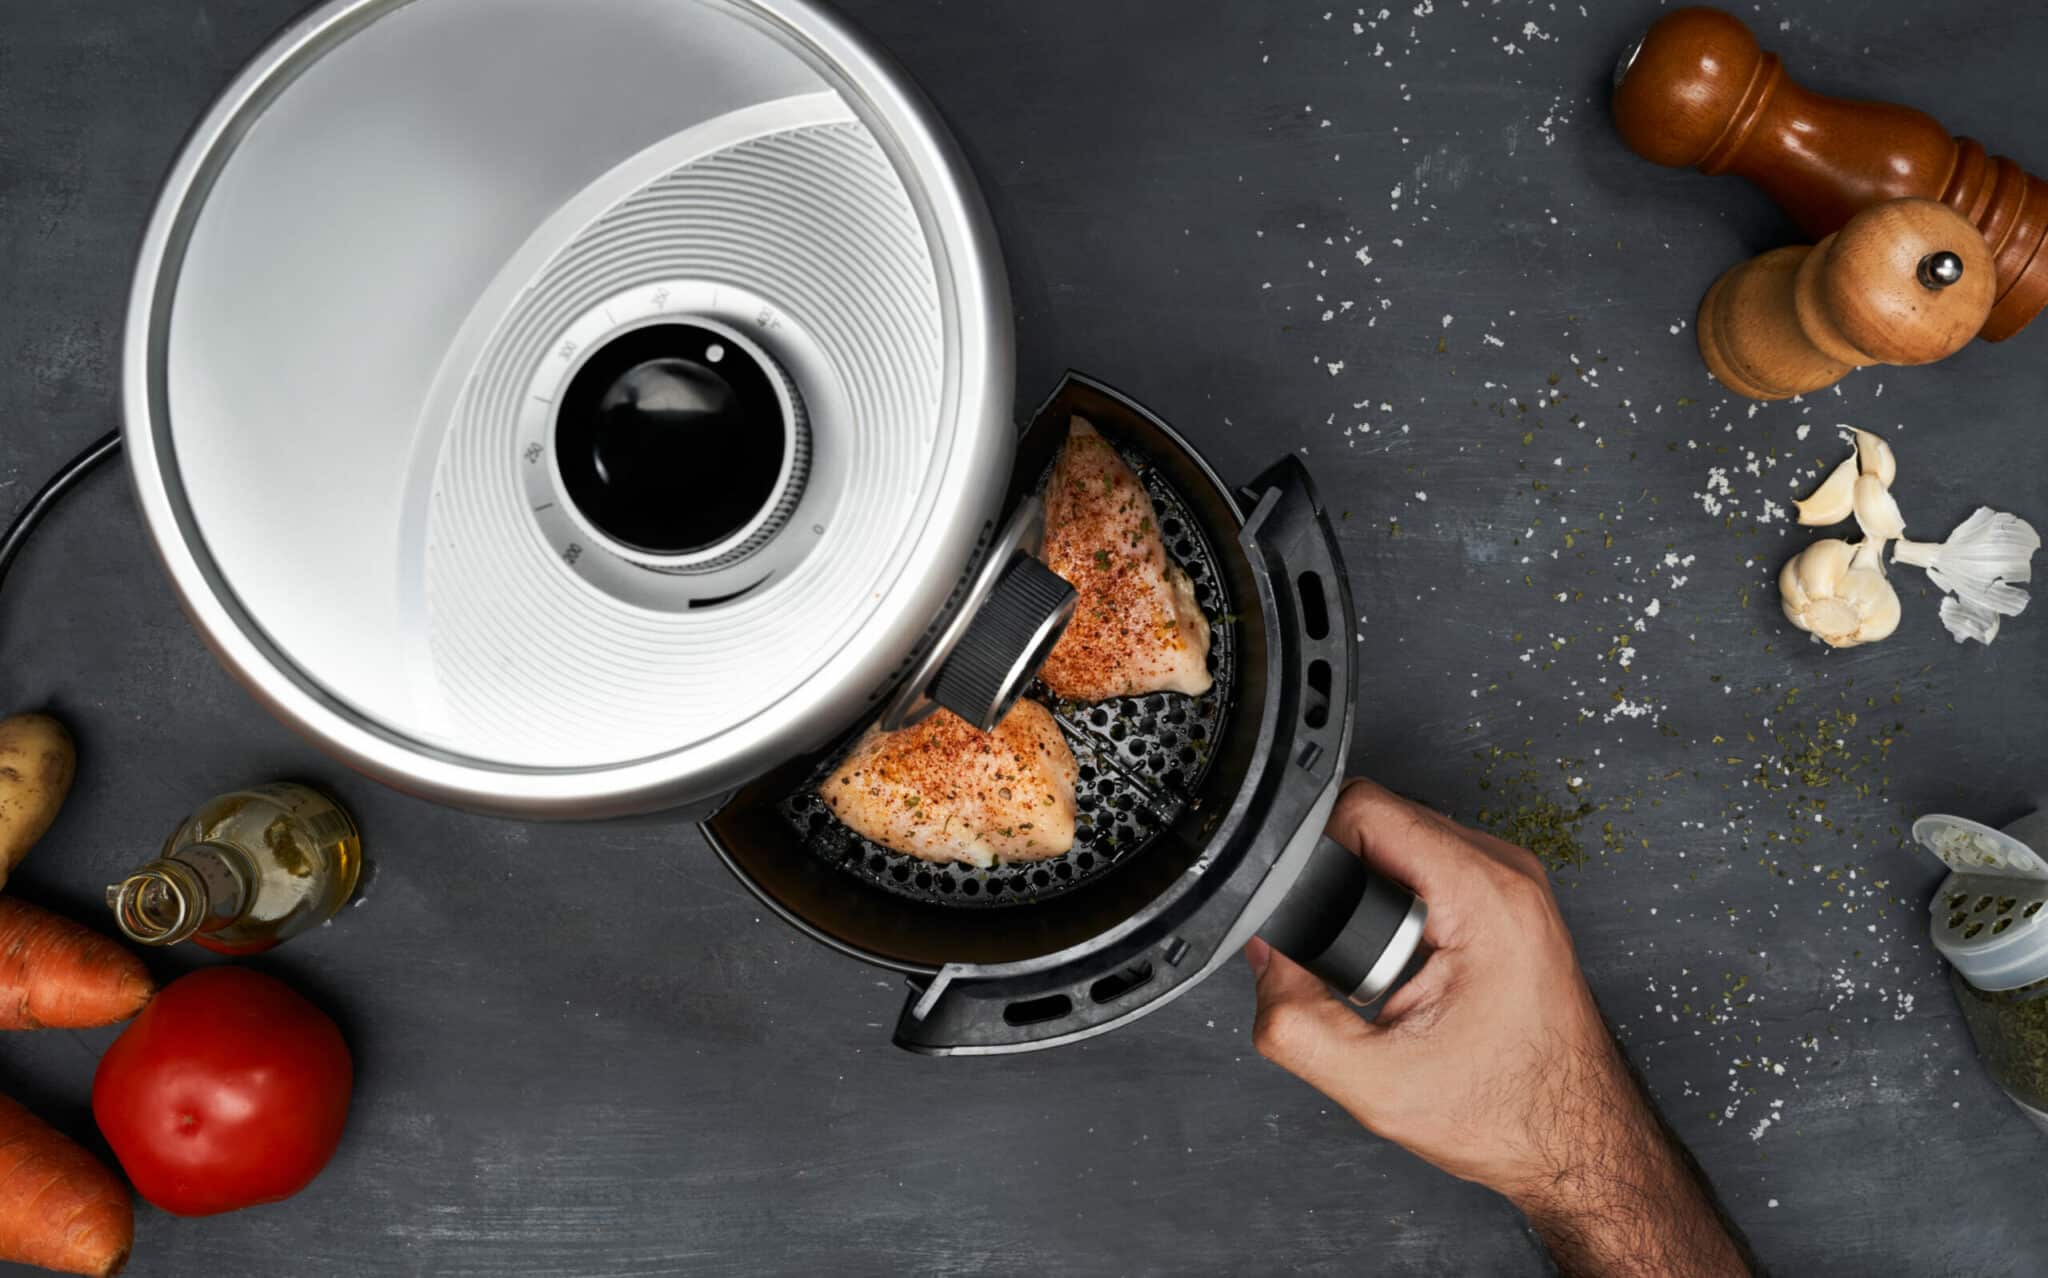 How To Cook Chicken Breast In An Air Fryer